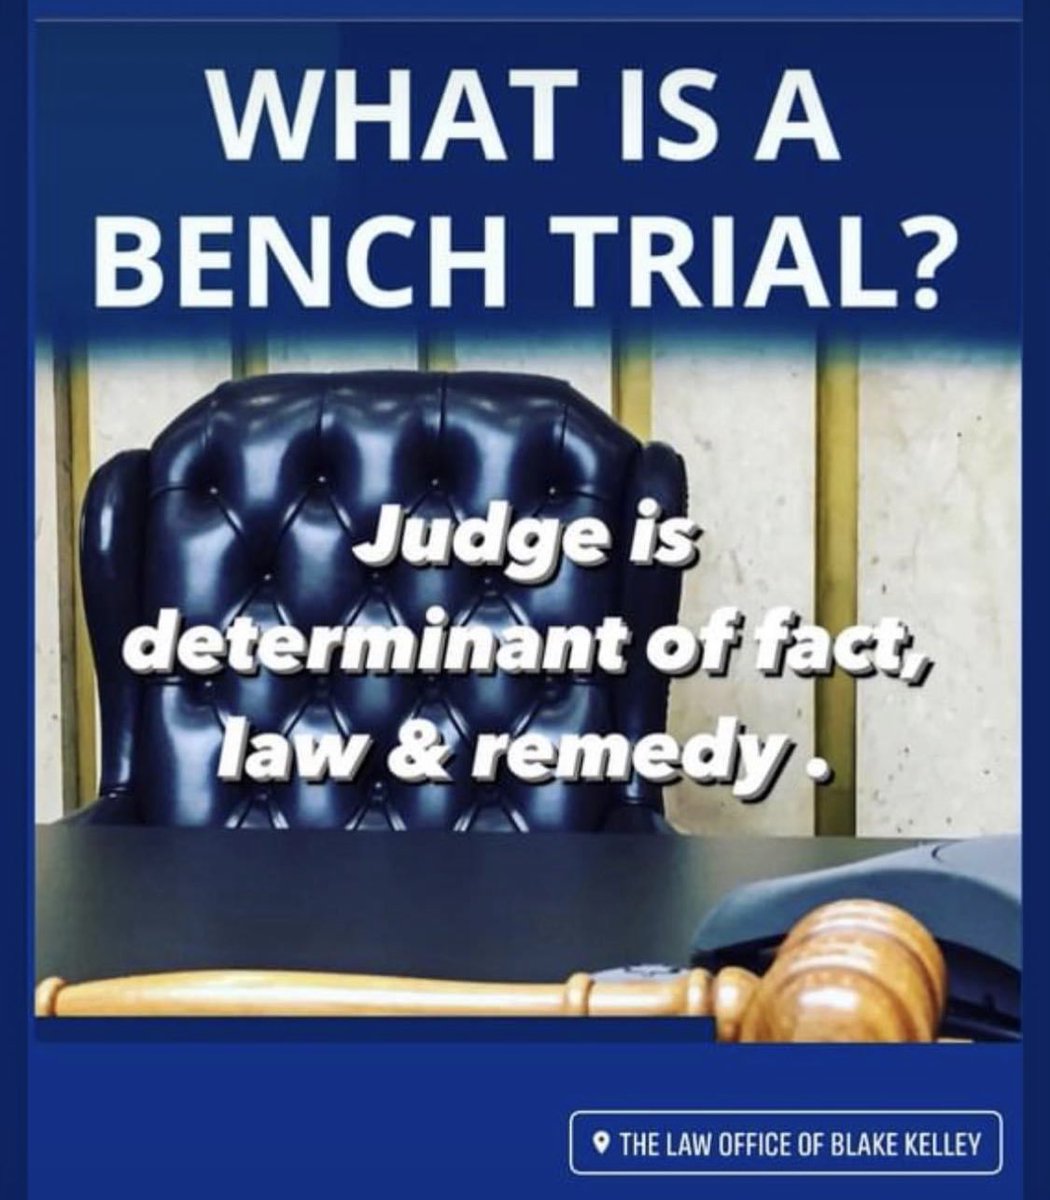 In #TN a bench #trial can be had in General Sessions Court on #misdemeanor cases but not #felonies. A #benchtrial can be had in Circuit #Court but is not preferred over a #jurytrial, which has 12 #jurors. #attorney #lawyer #nashville #tennessee #criminaldefense #dui #crime #judge